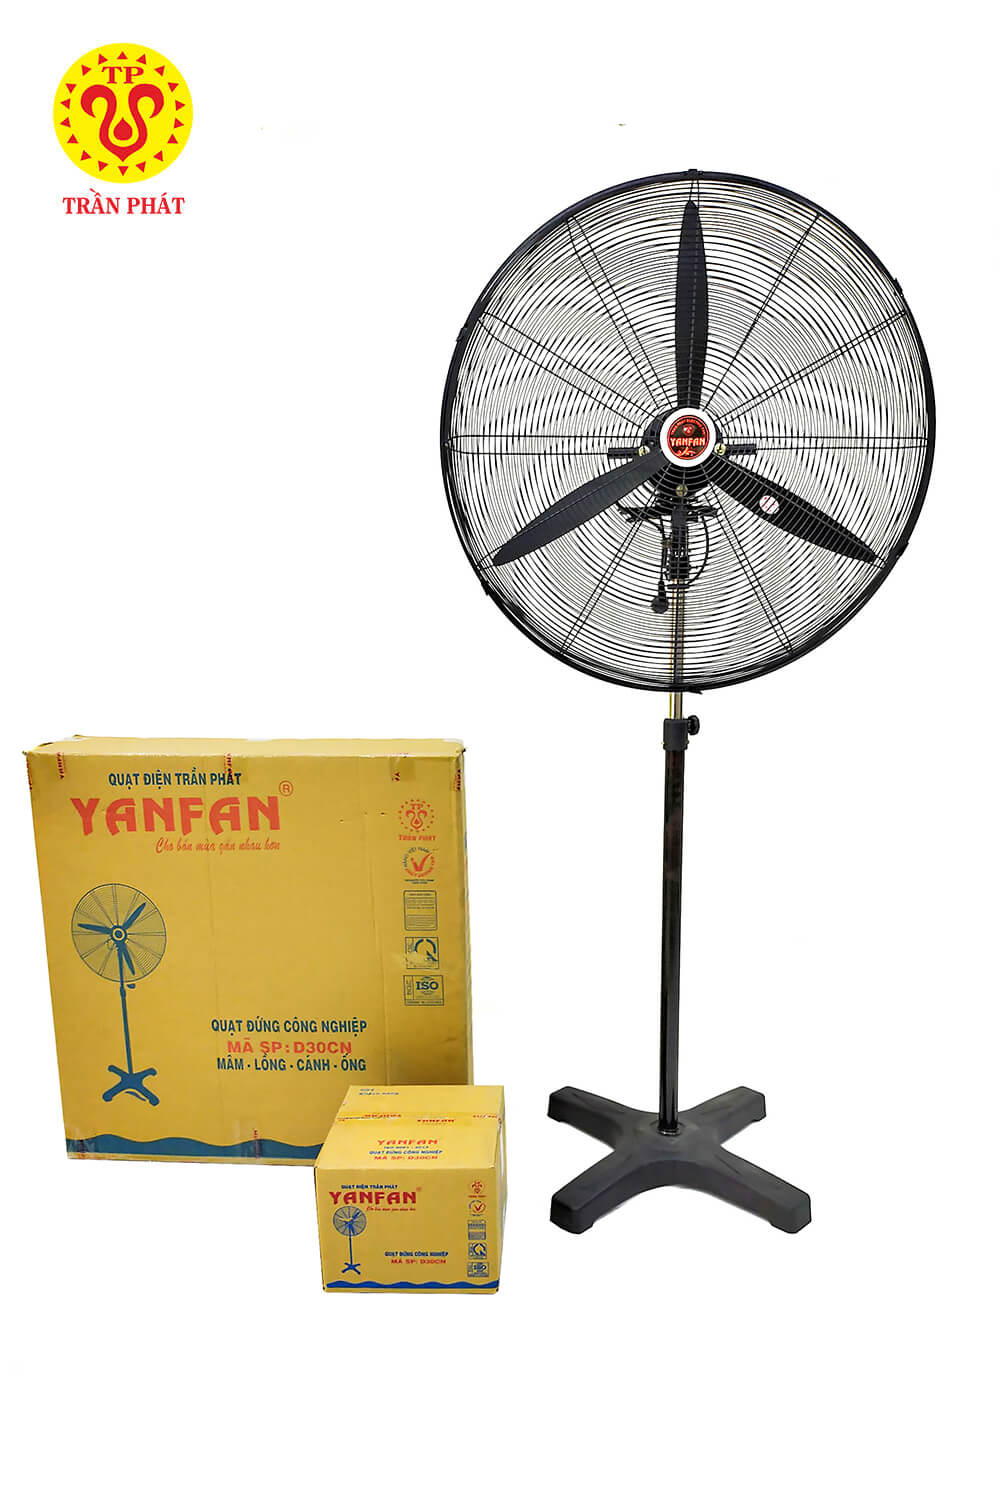  Stand fan moves easily